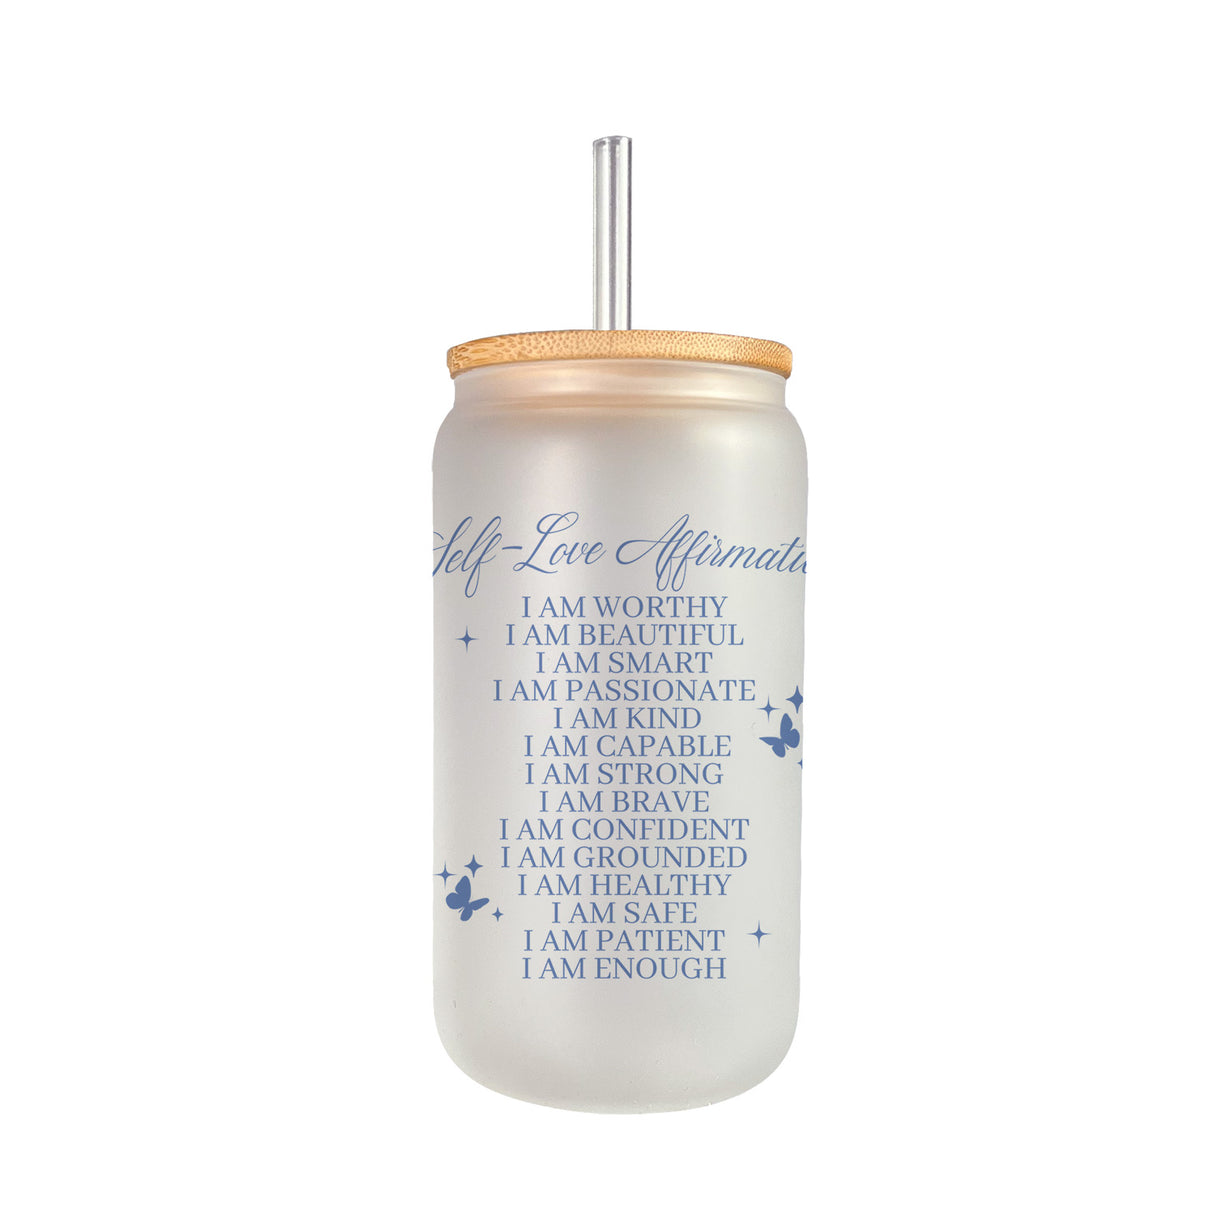 These frosted glass can tumblers are great motivational pieces with words that should uplift and encourage.